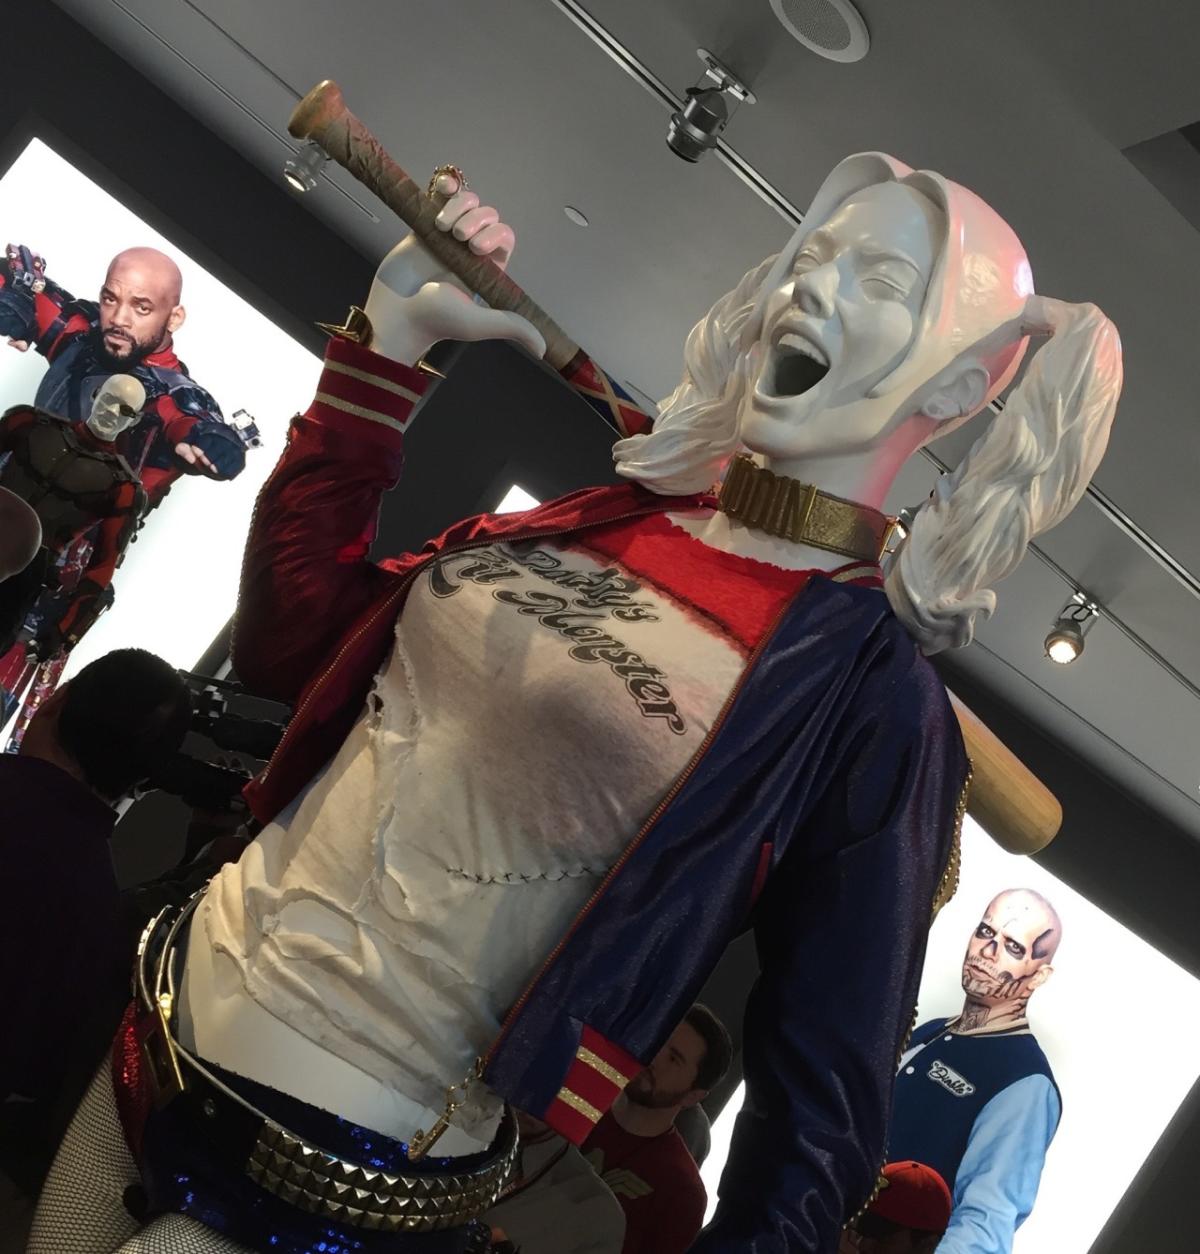 Hollywood Movie Costumes and Props: Man of Steel movie costumes on  display